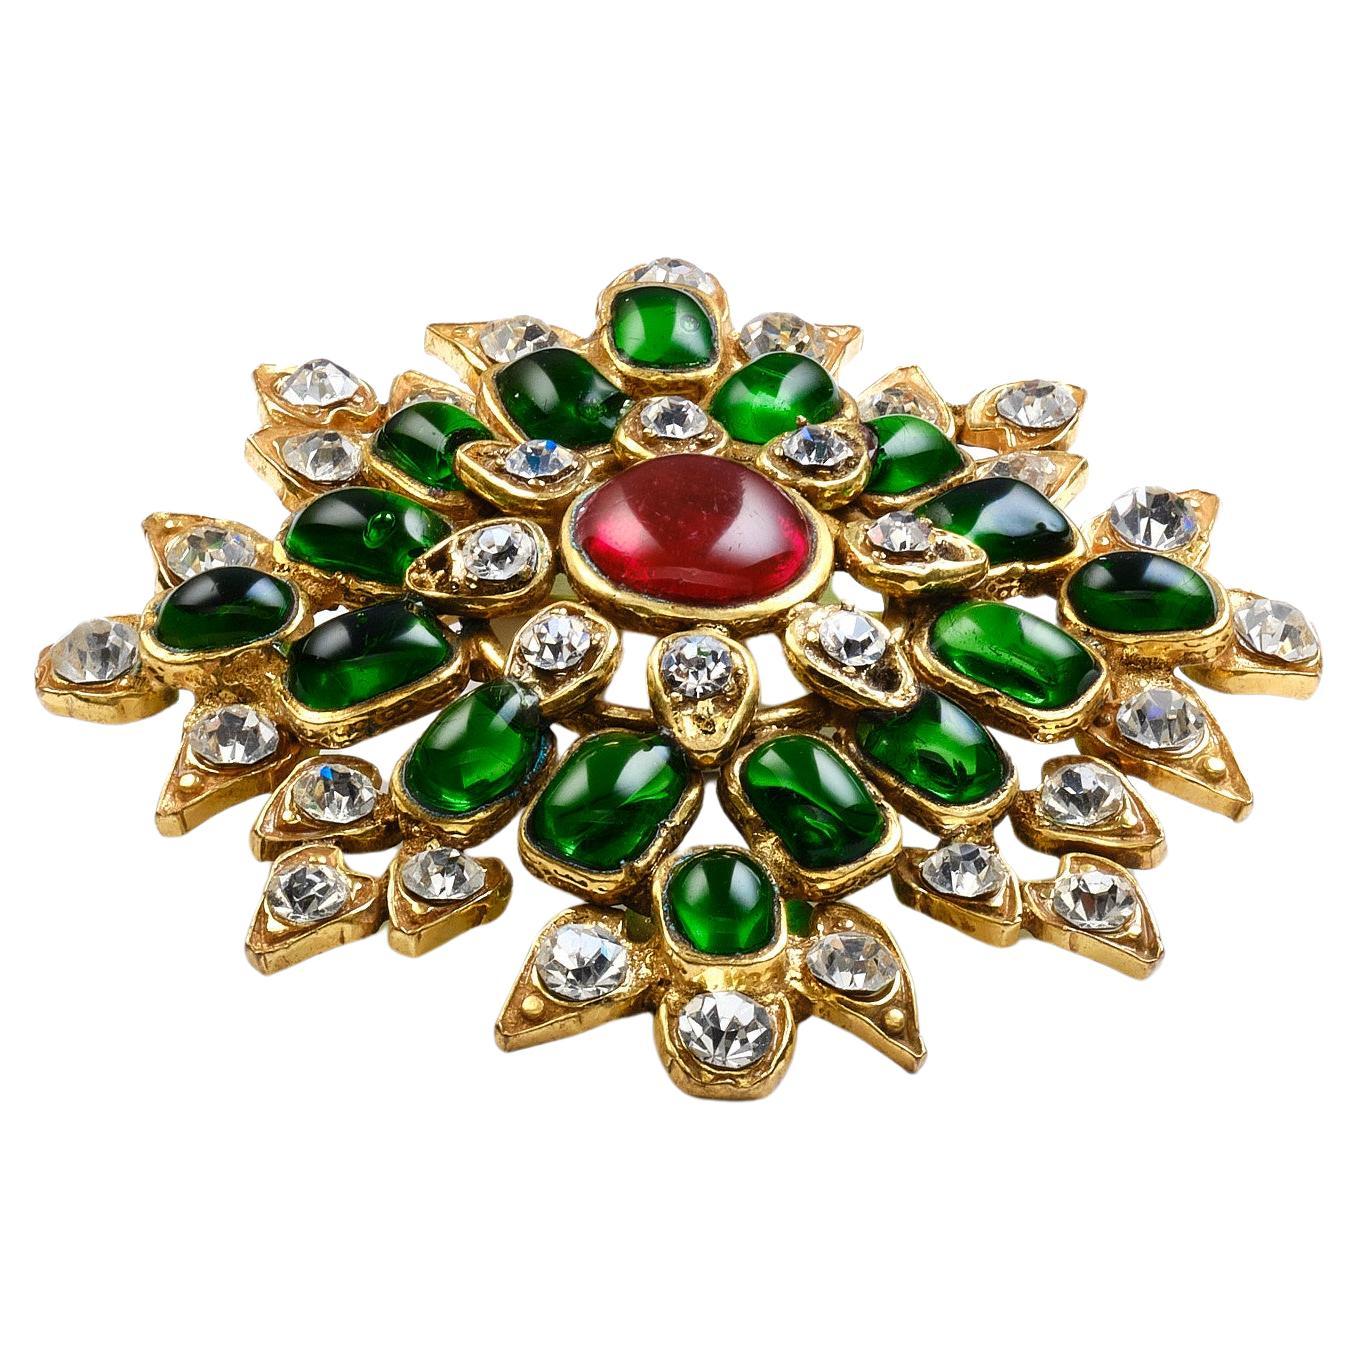 CHANEL BROOCH, green and red Gripoix glass, rhinestons, signed 1970/80, France   For Sale